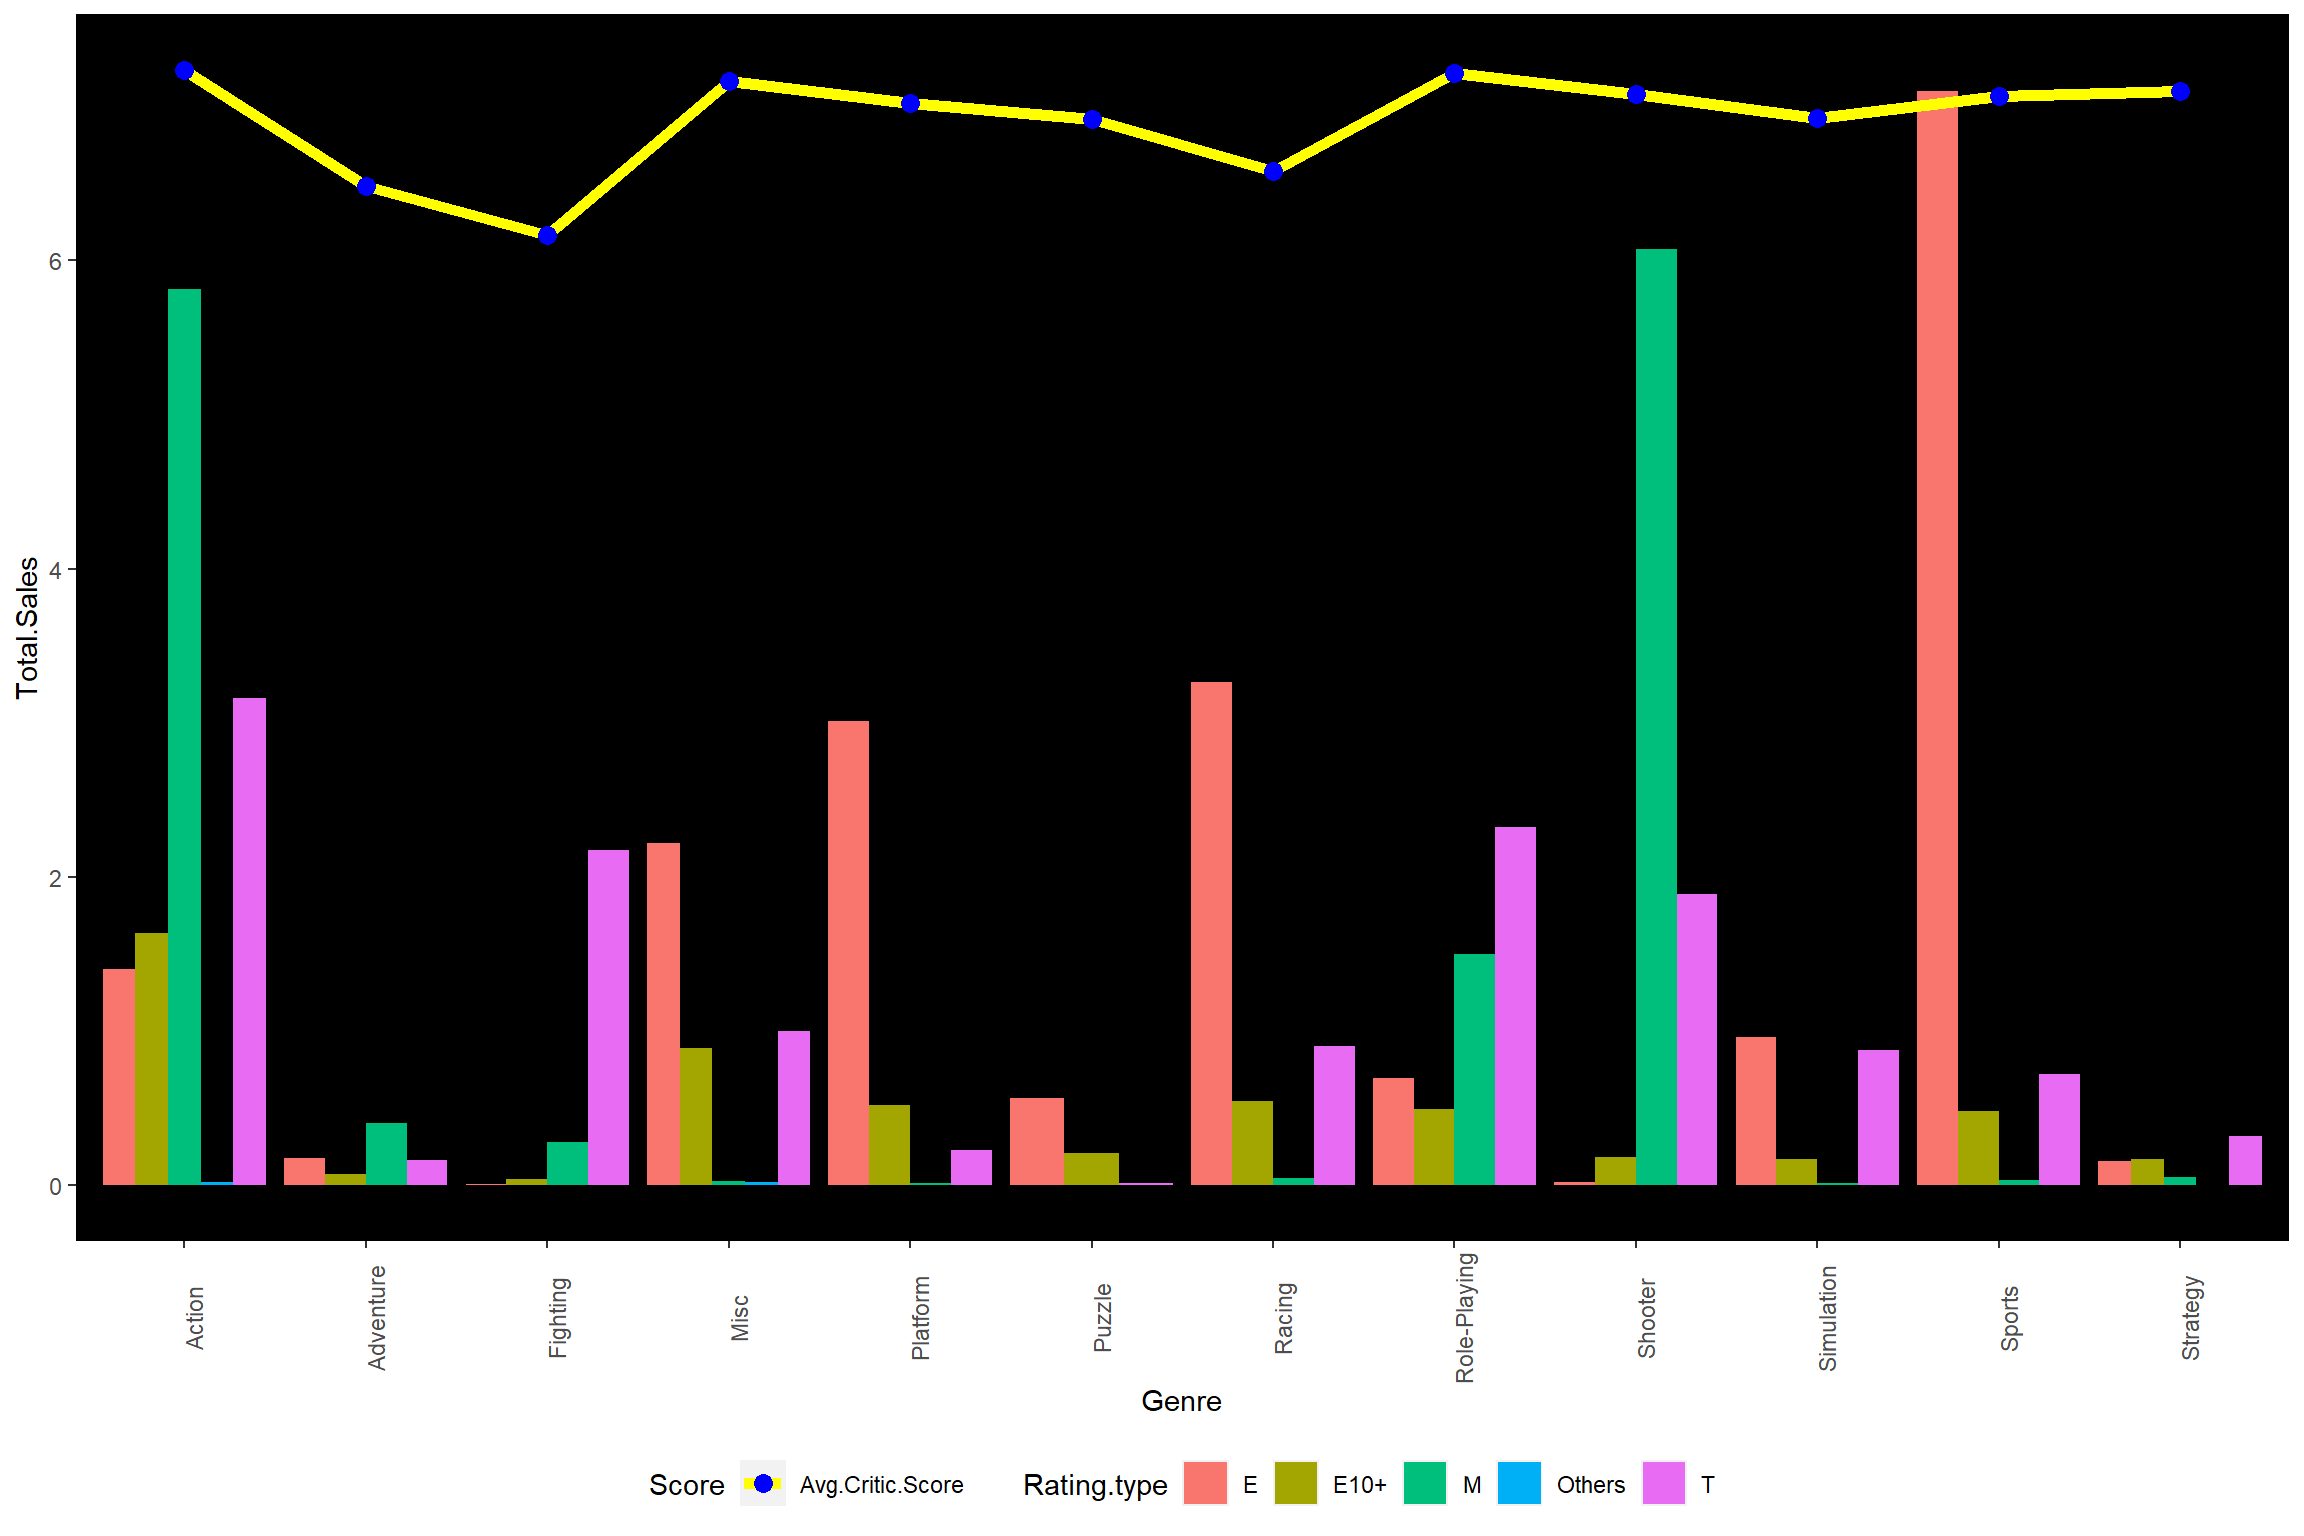 Total sales for genre and rating with critic score.